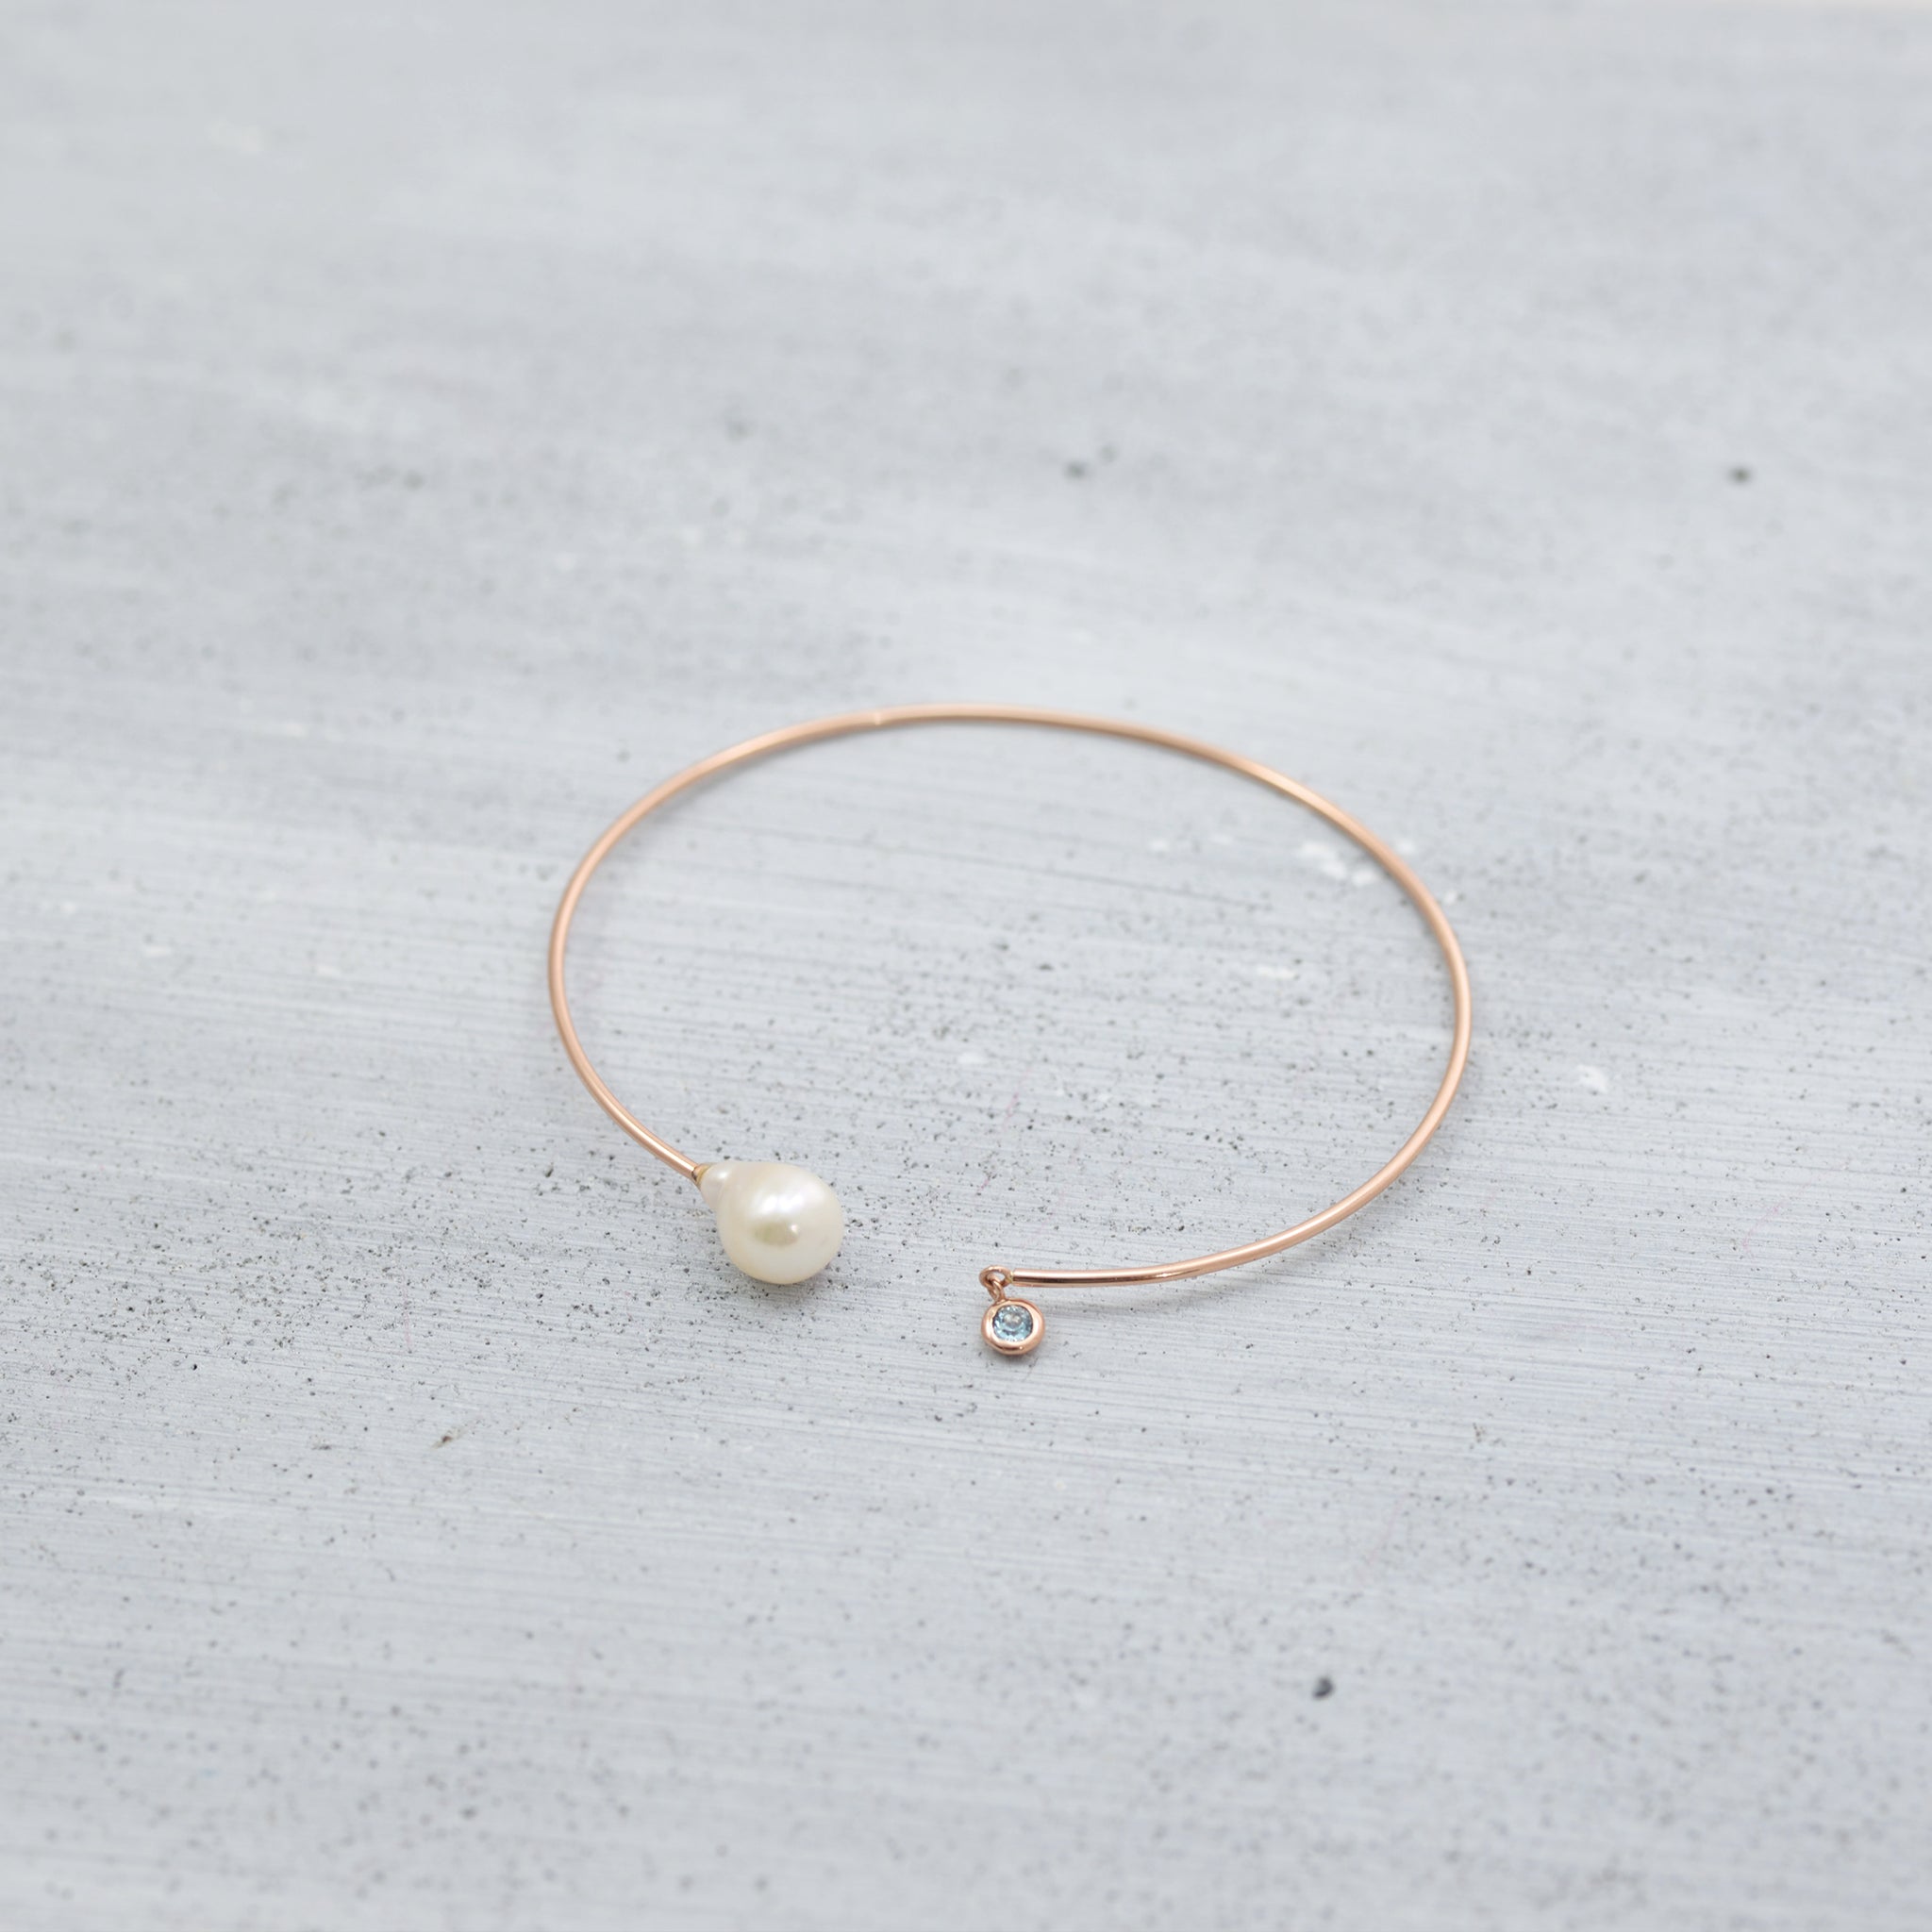 One and only pearl cuff Bracelet - 14K/ 18K Gold